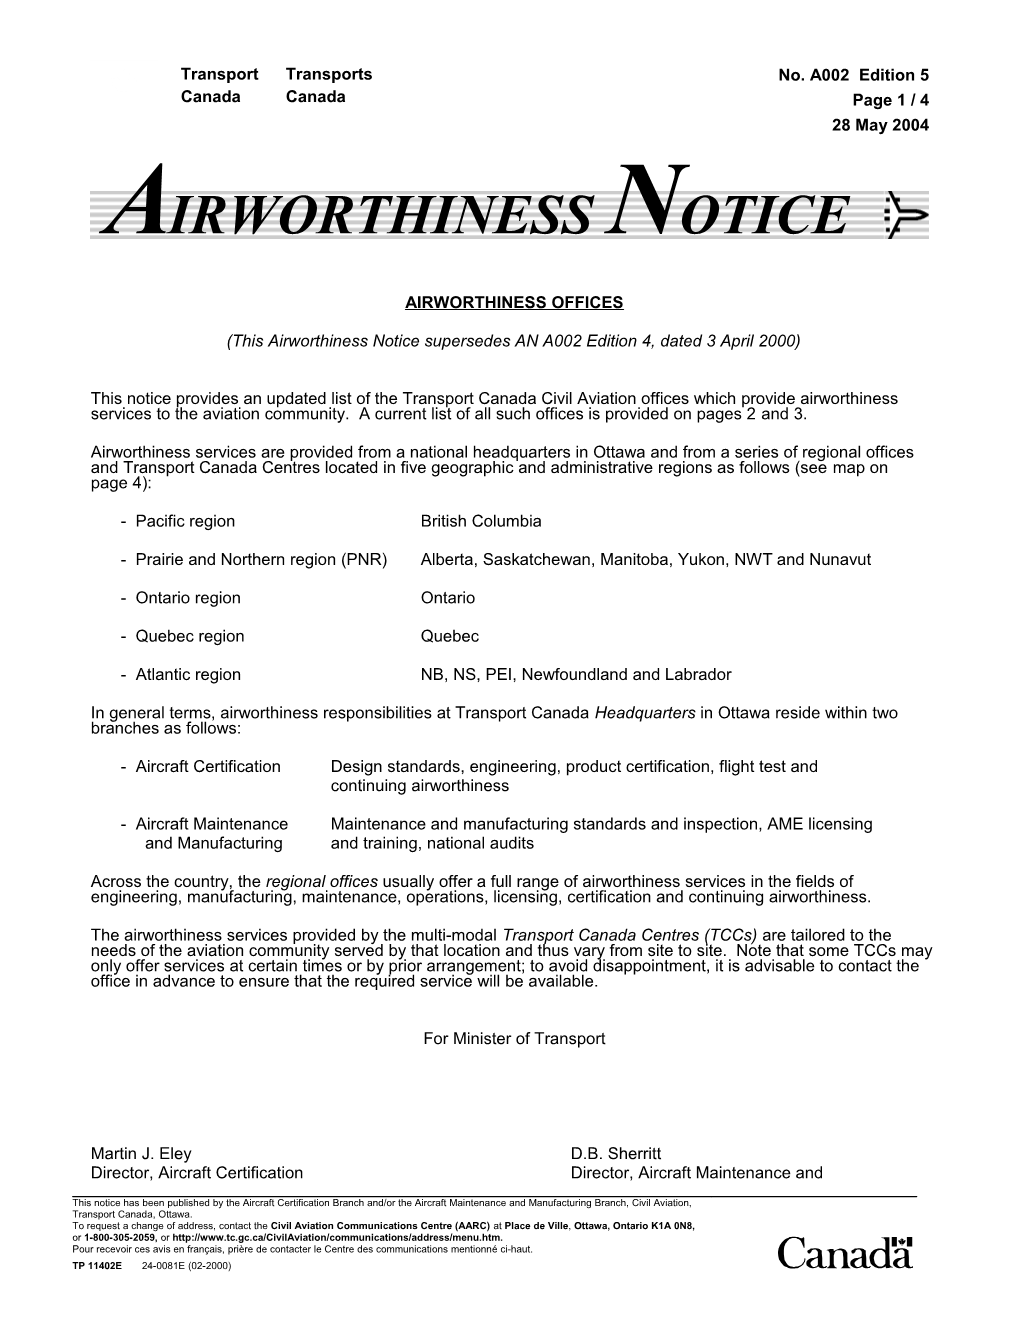 Airworthiness Offices